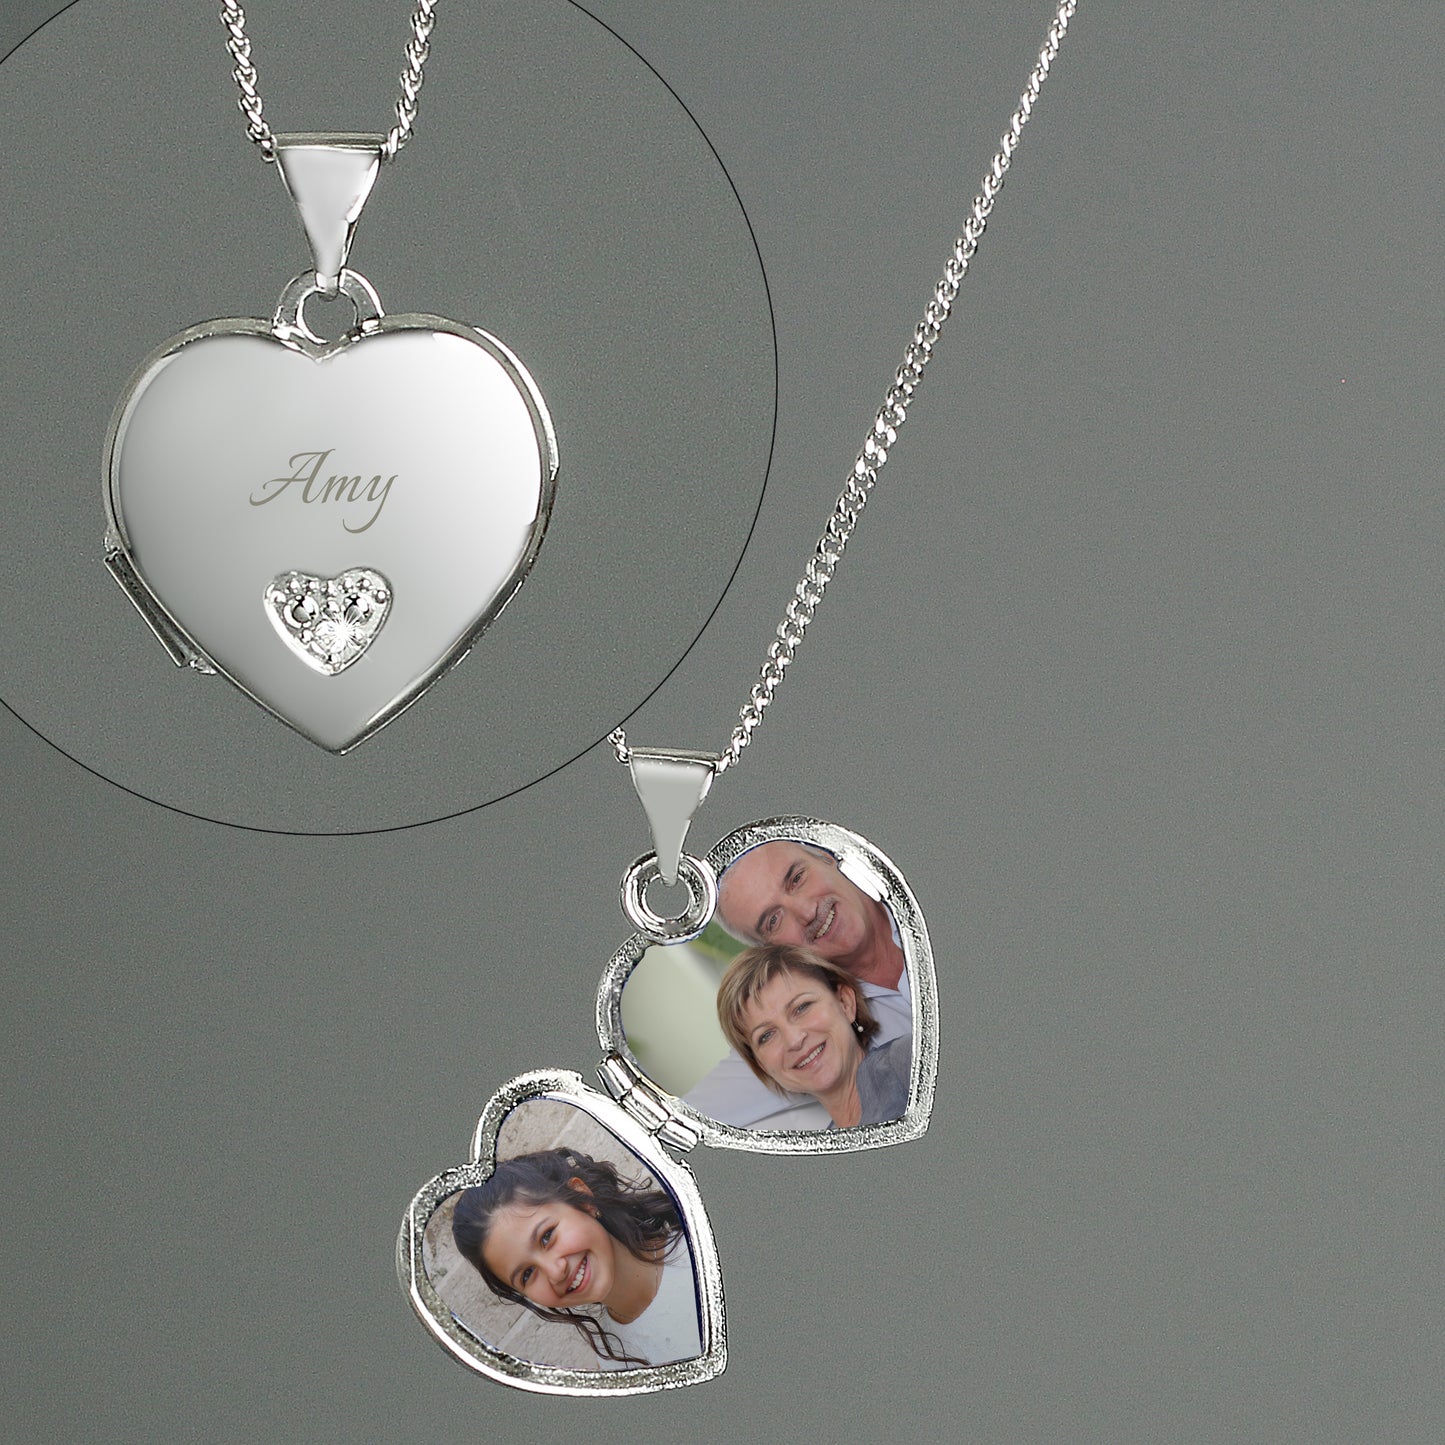 Personalised Children's Sterling Silver Heart Locket Necklace